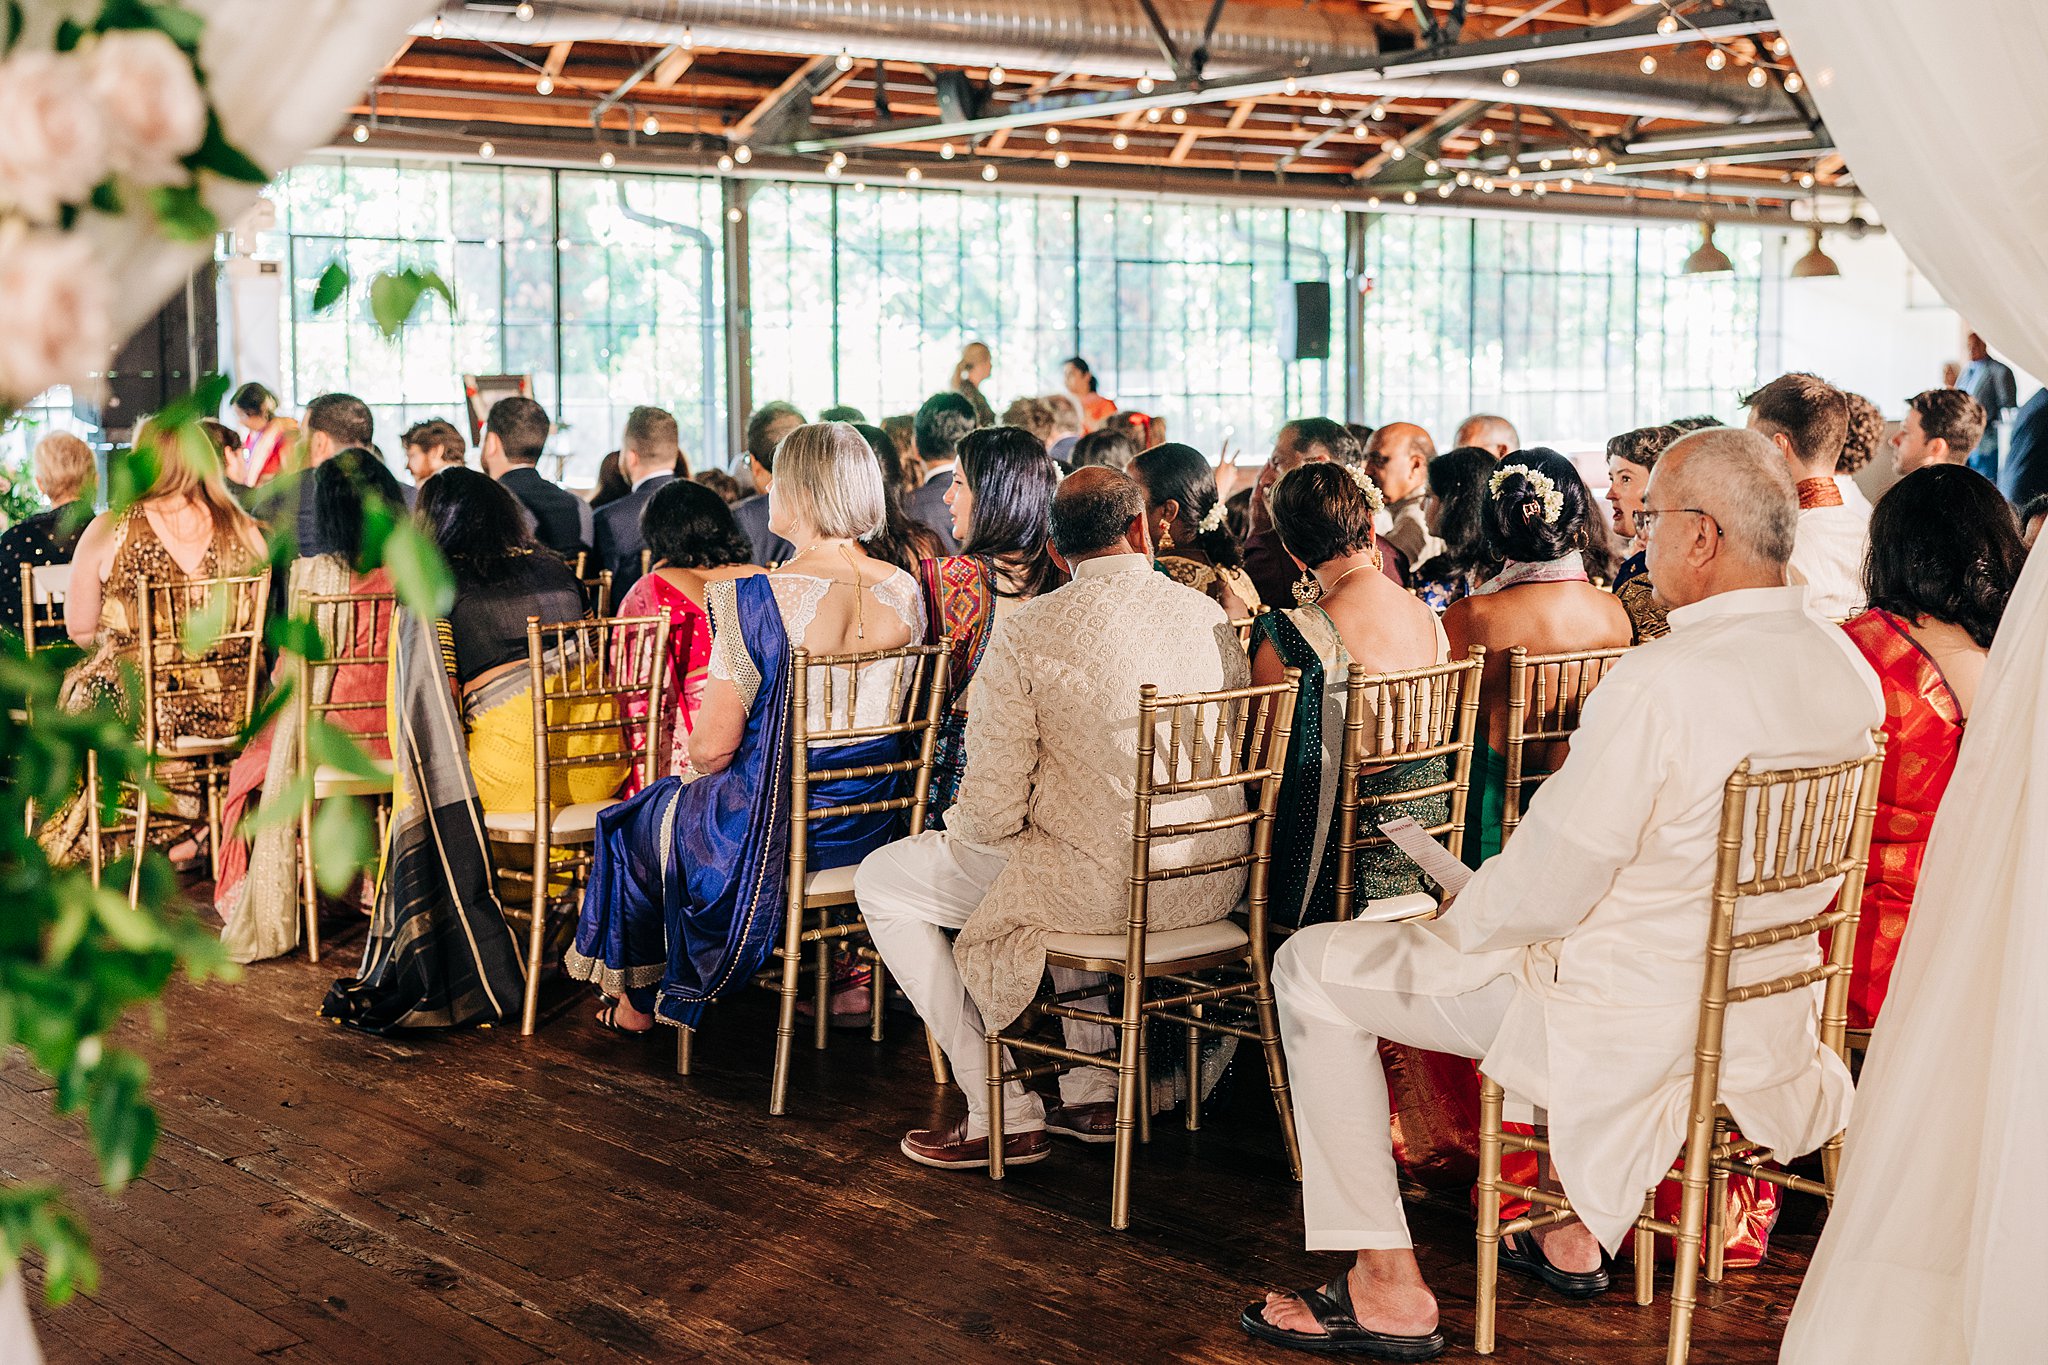 Guests during a summerour studio wedding reception indoors on gold chairs